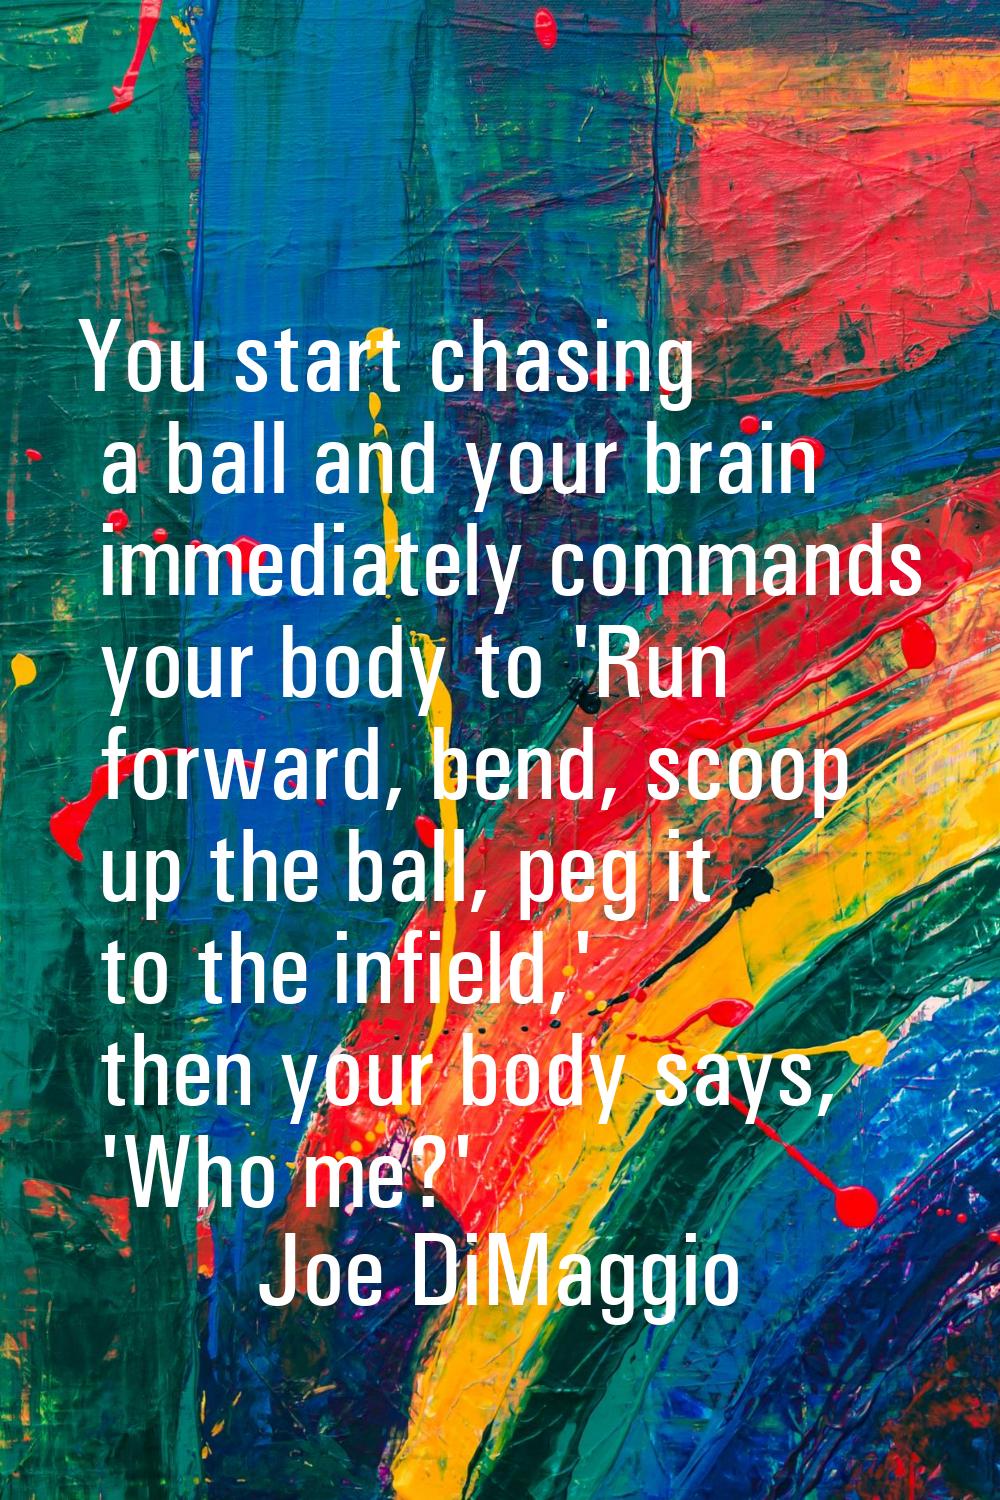 You start chasing a ball and your brain immediately commands your body to 'Run forward, bend, scoop